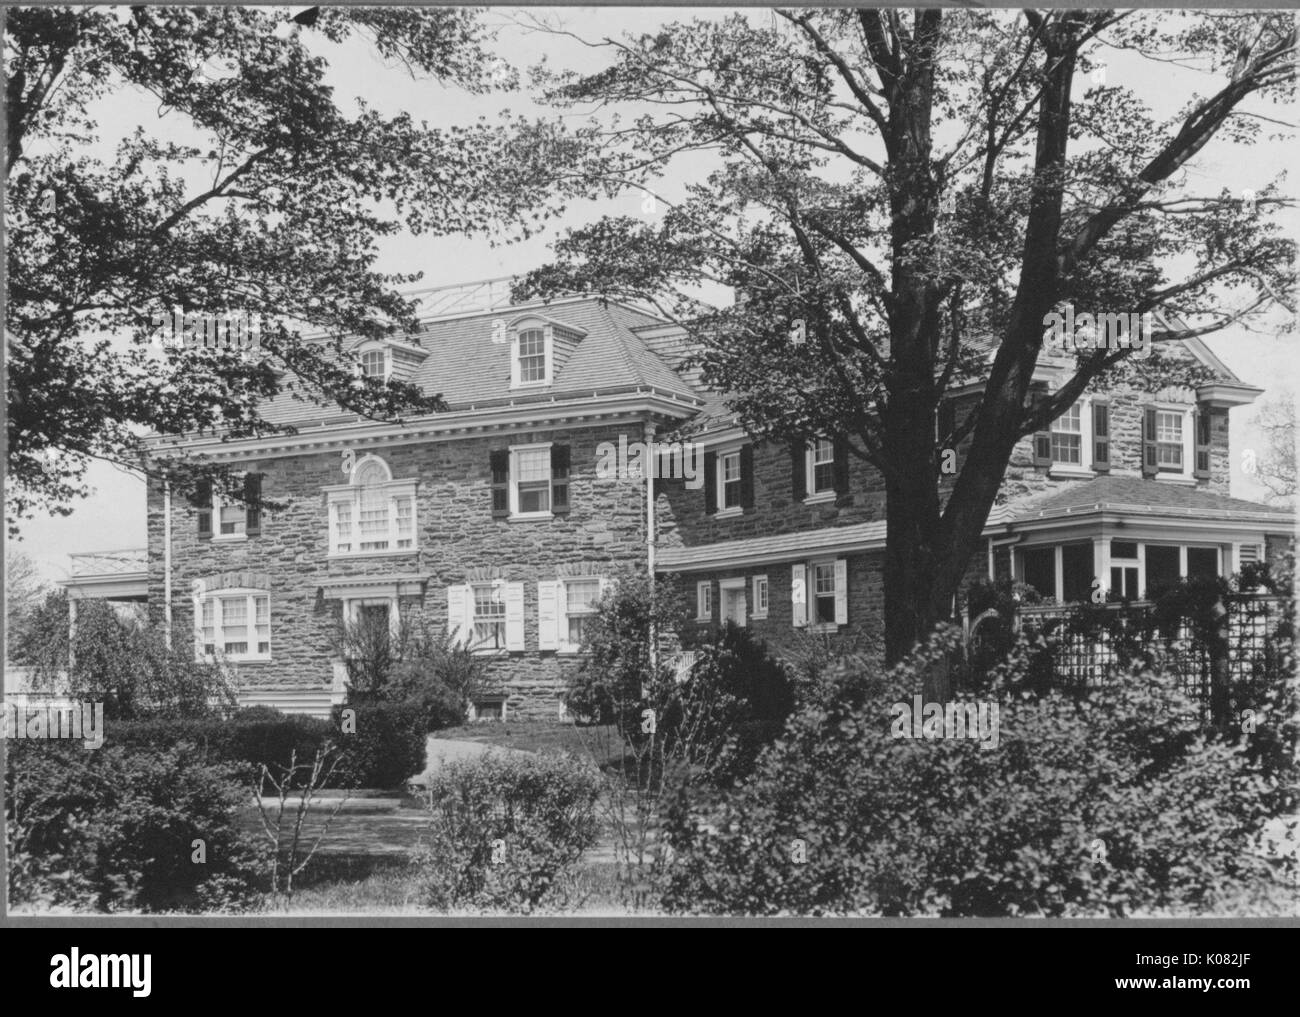 Angled view of large home with cobblestone walls and many windows, house has porch, view of home covered by wide variety of vegetation from bushes to trees, Baltimore, Maryland, 1910. This image is from a series documenting the construction and sale of homes in the Roland Park/Guilford neighborhood of Baltimore, a streetcar suburb and one of the first planned communities in the United States. Stock Photo